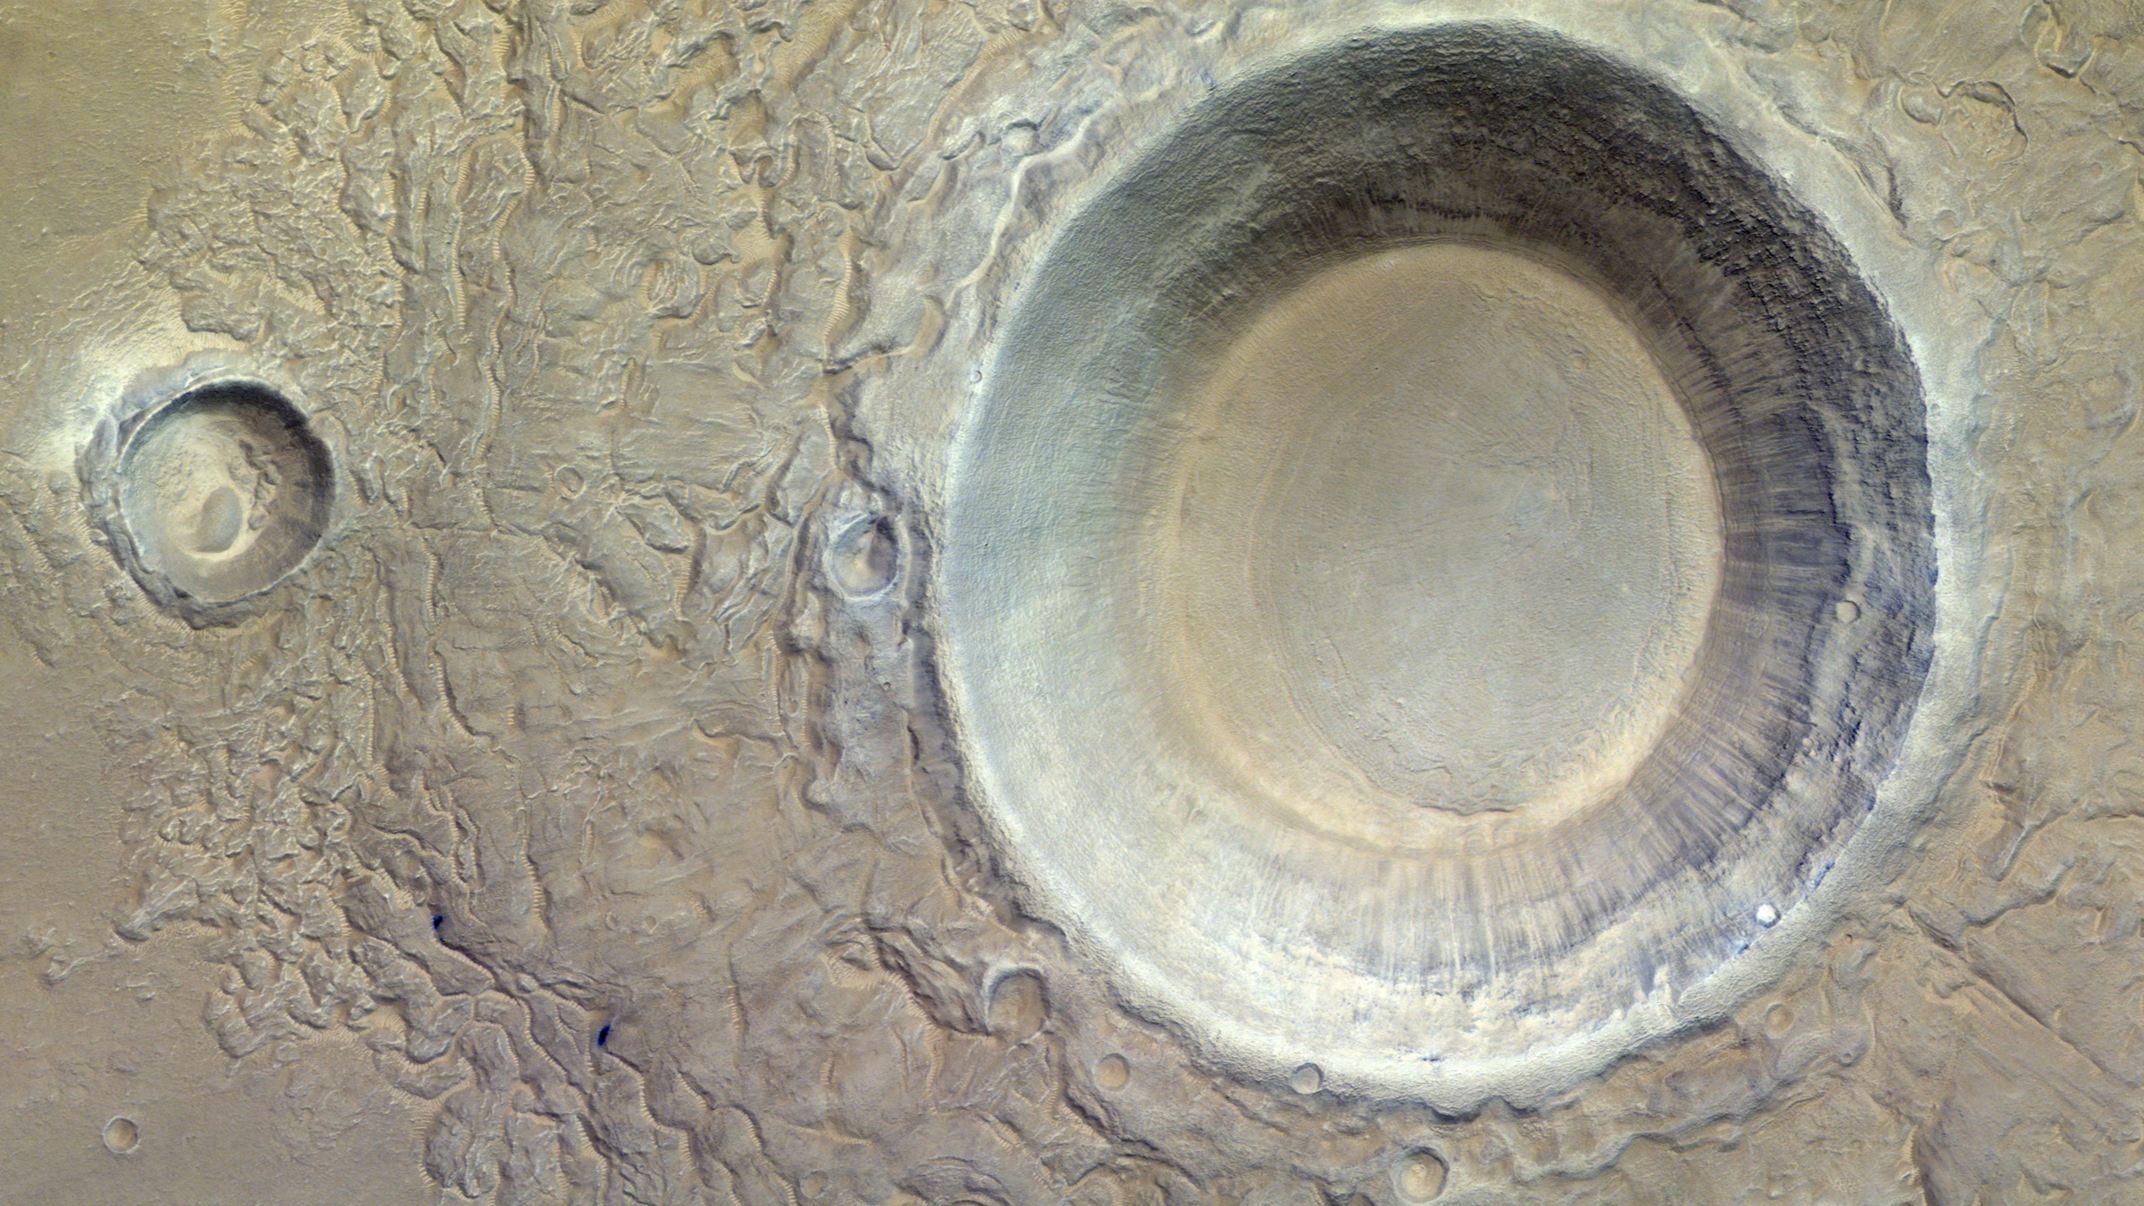 A massive, icy Mars crater stares up at a Red Planet orbiter (image) thumbnail